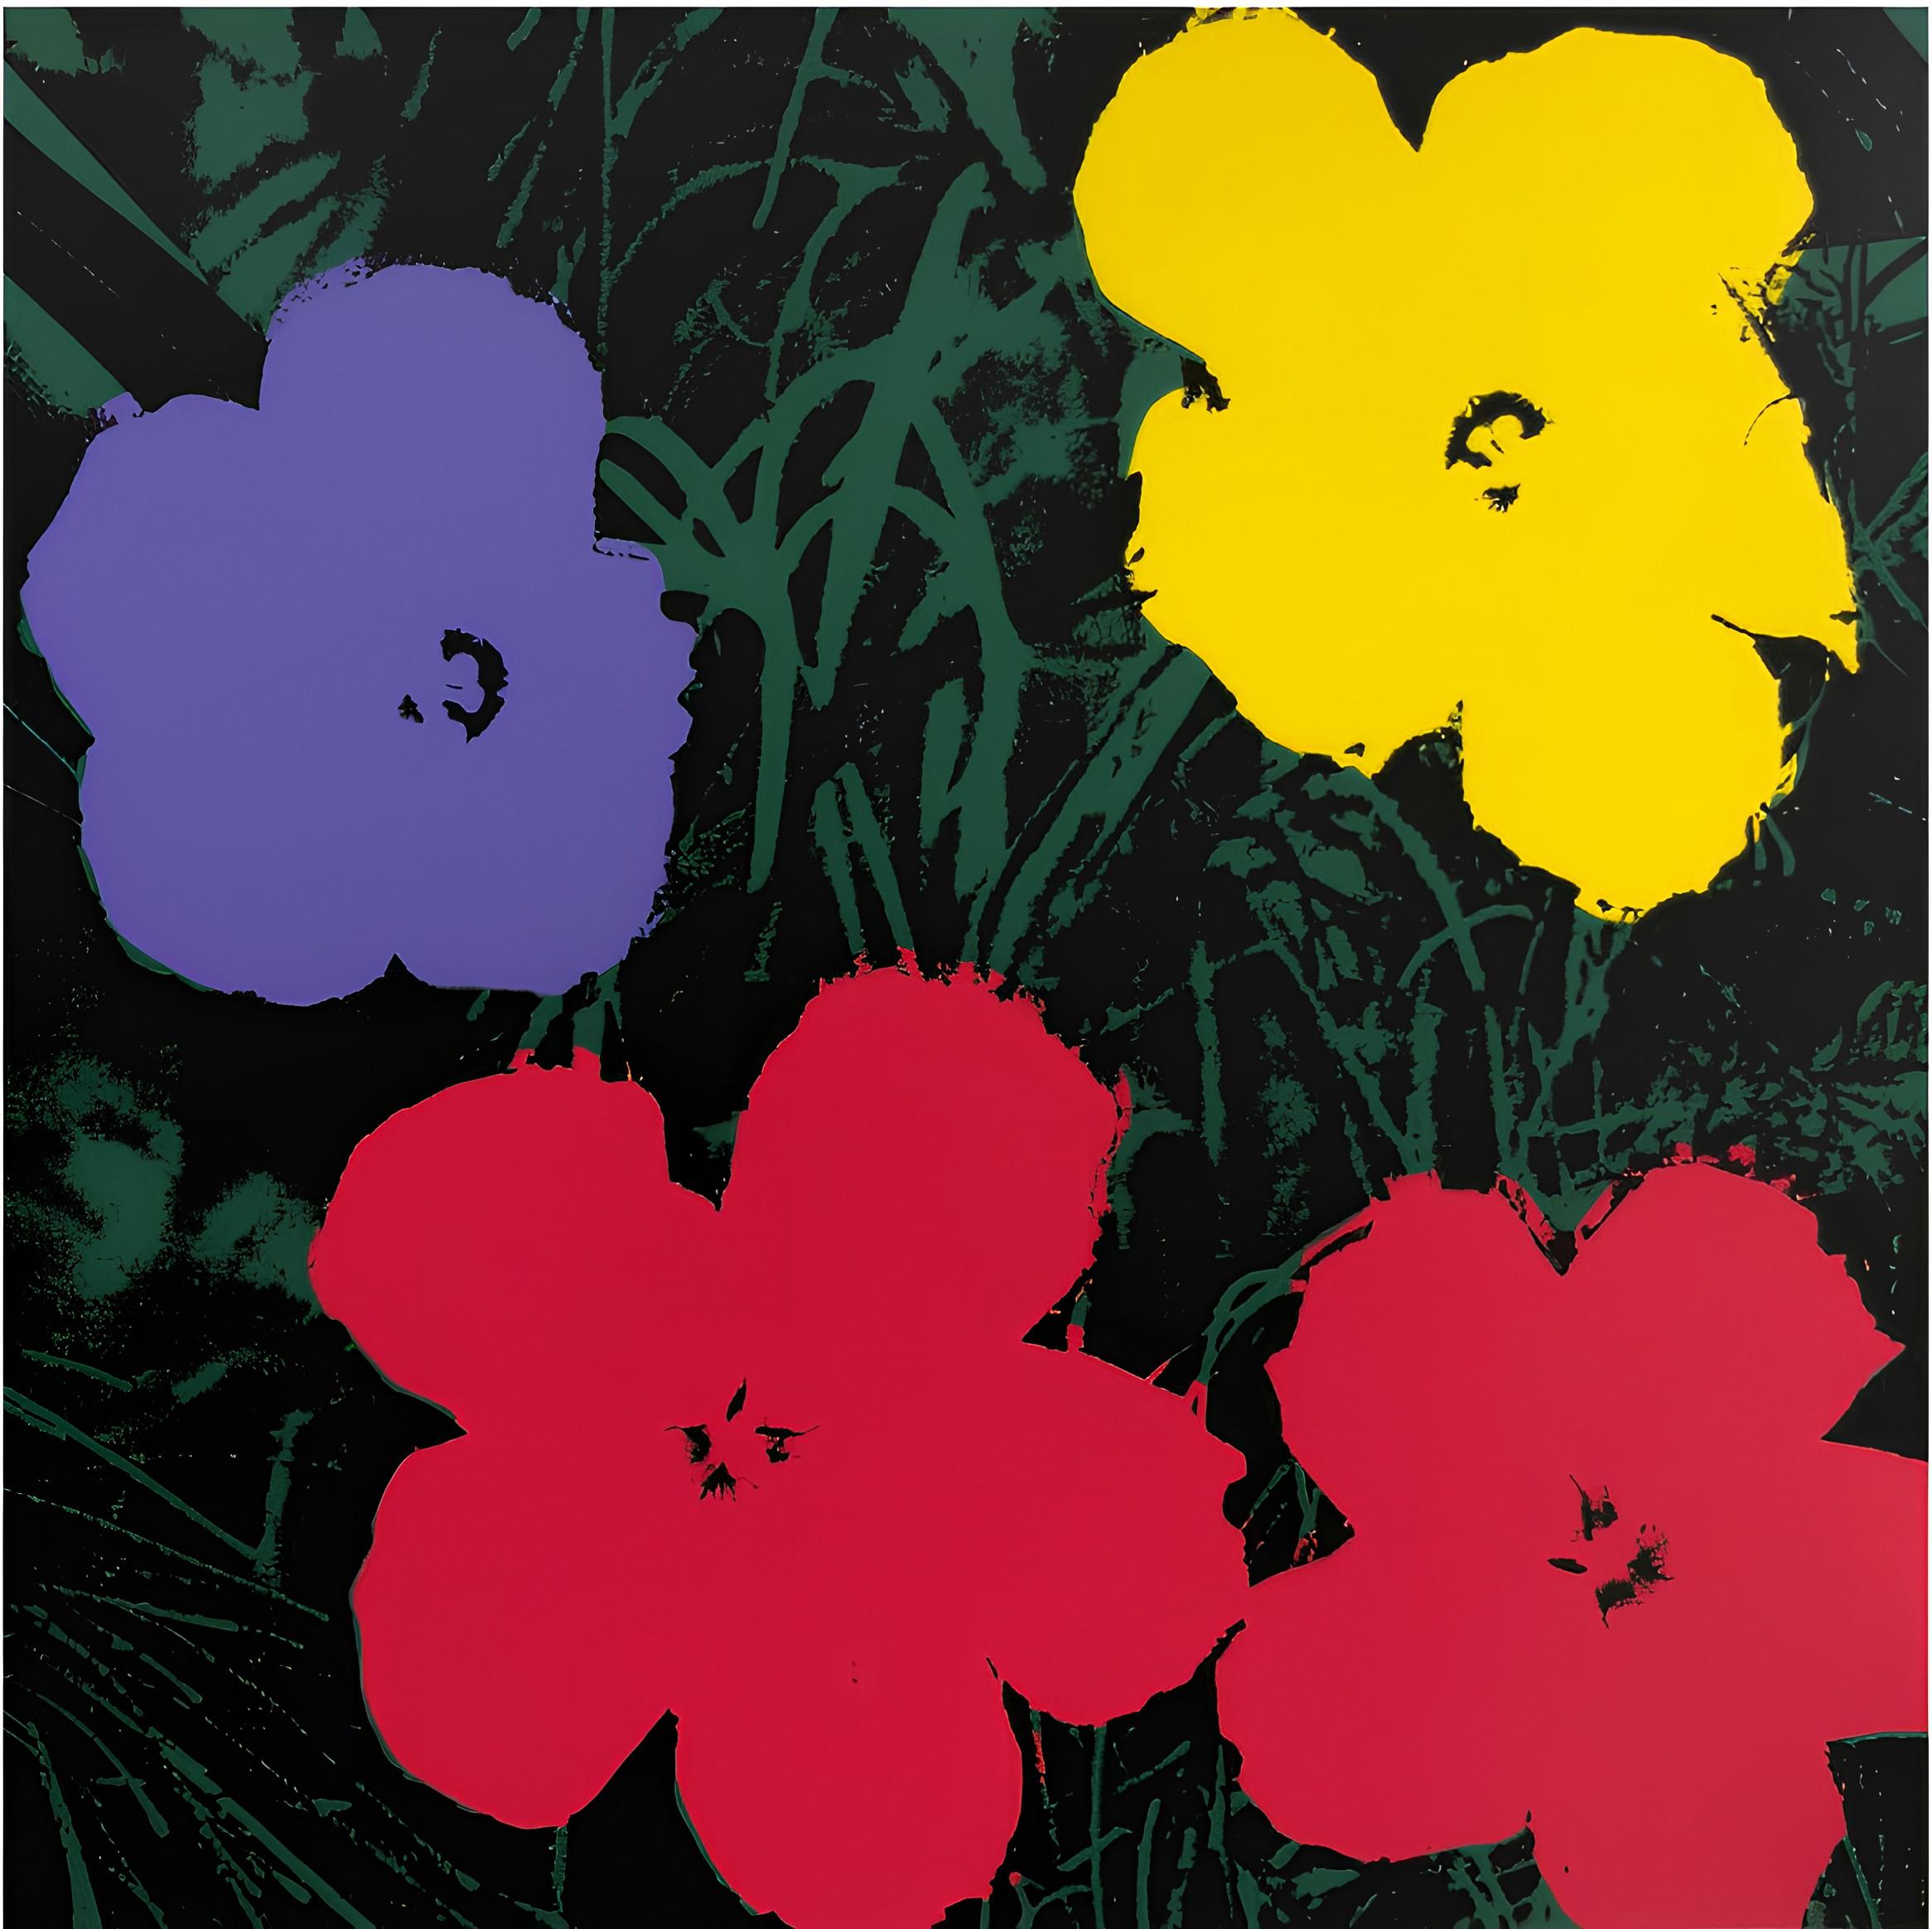 How many Andy Warhol paintings are there?